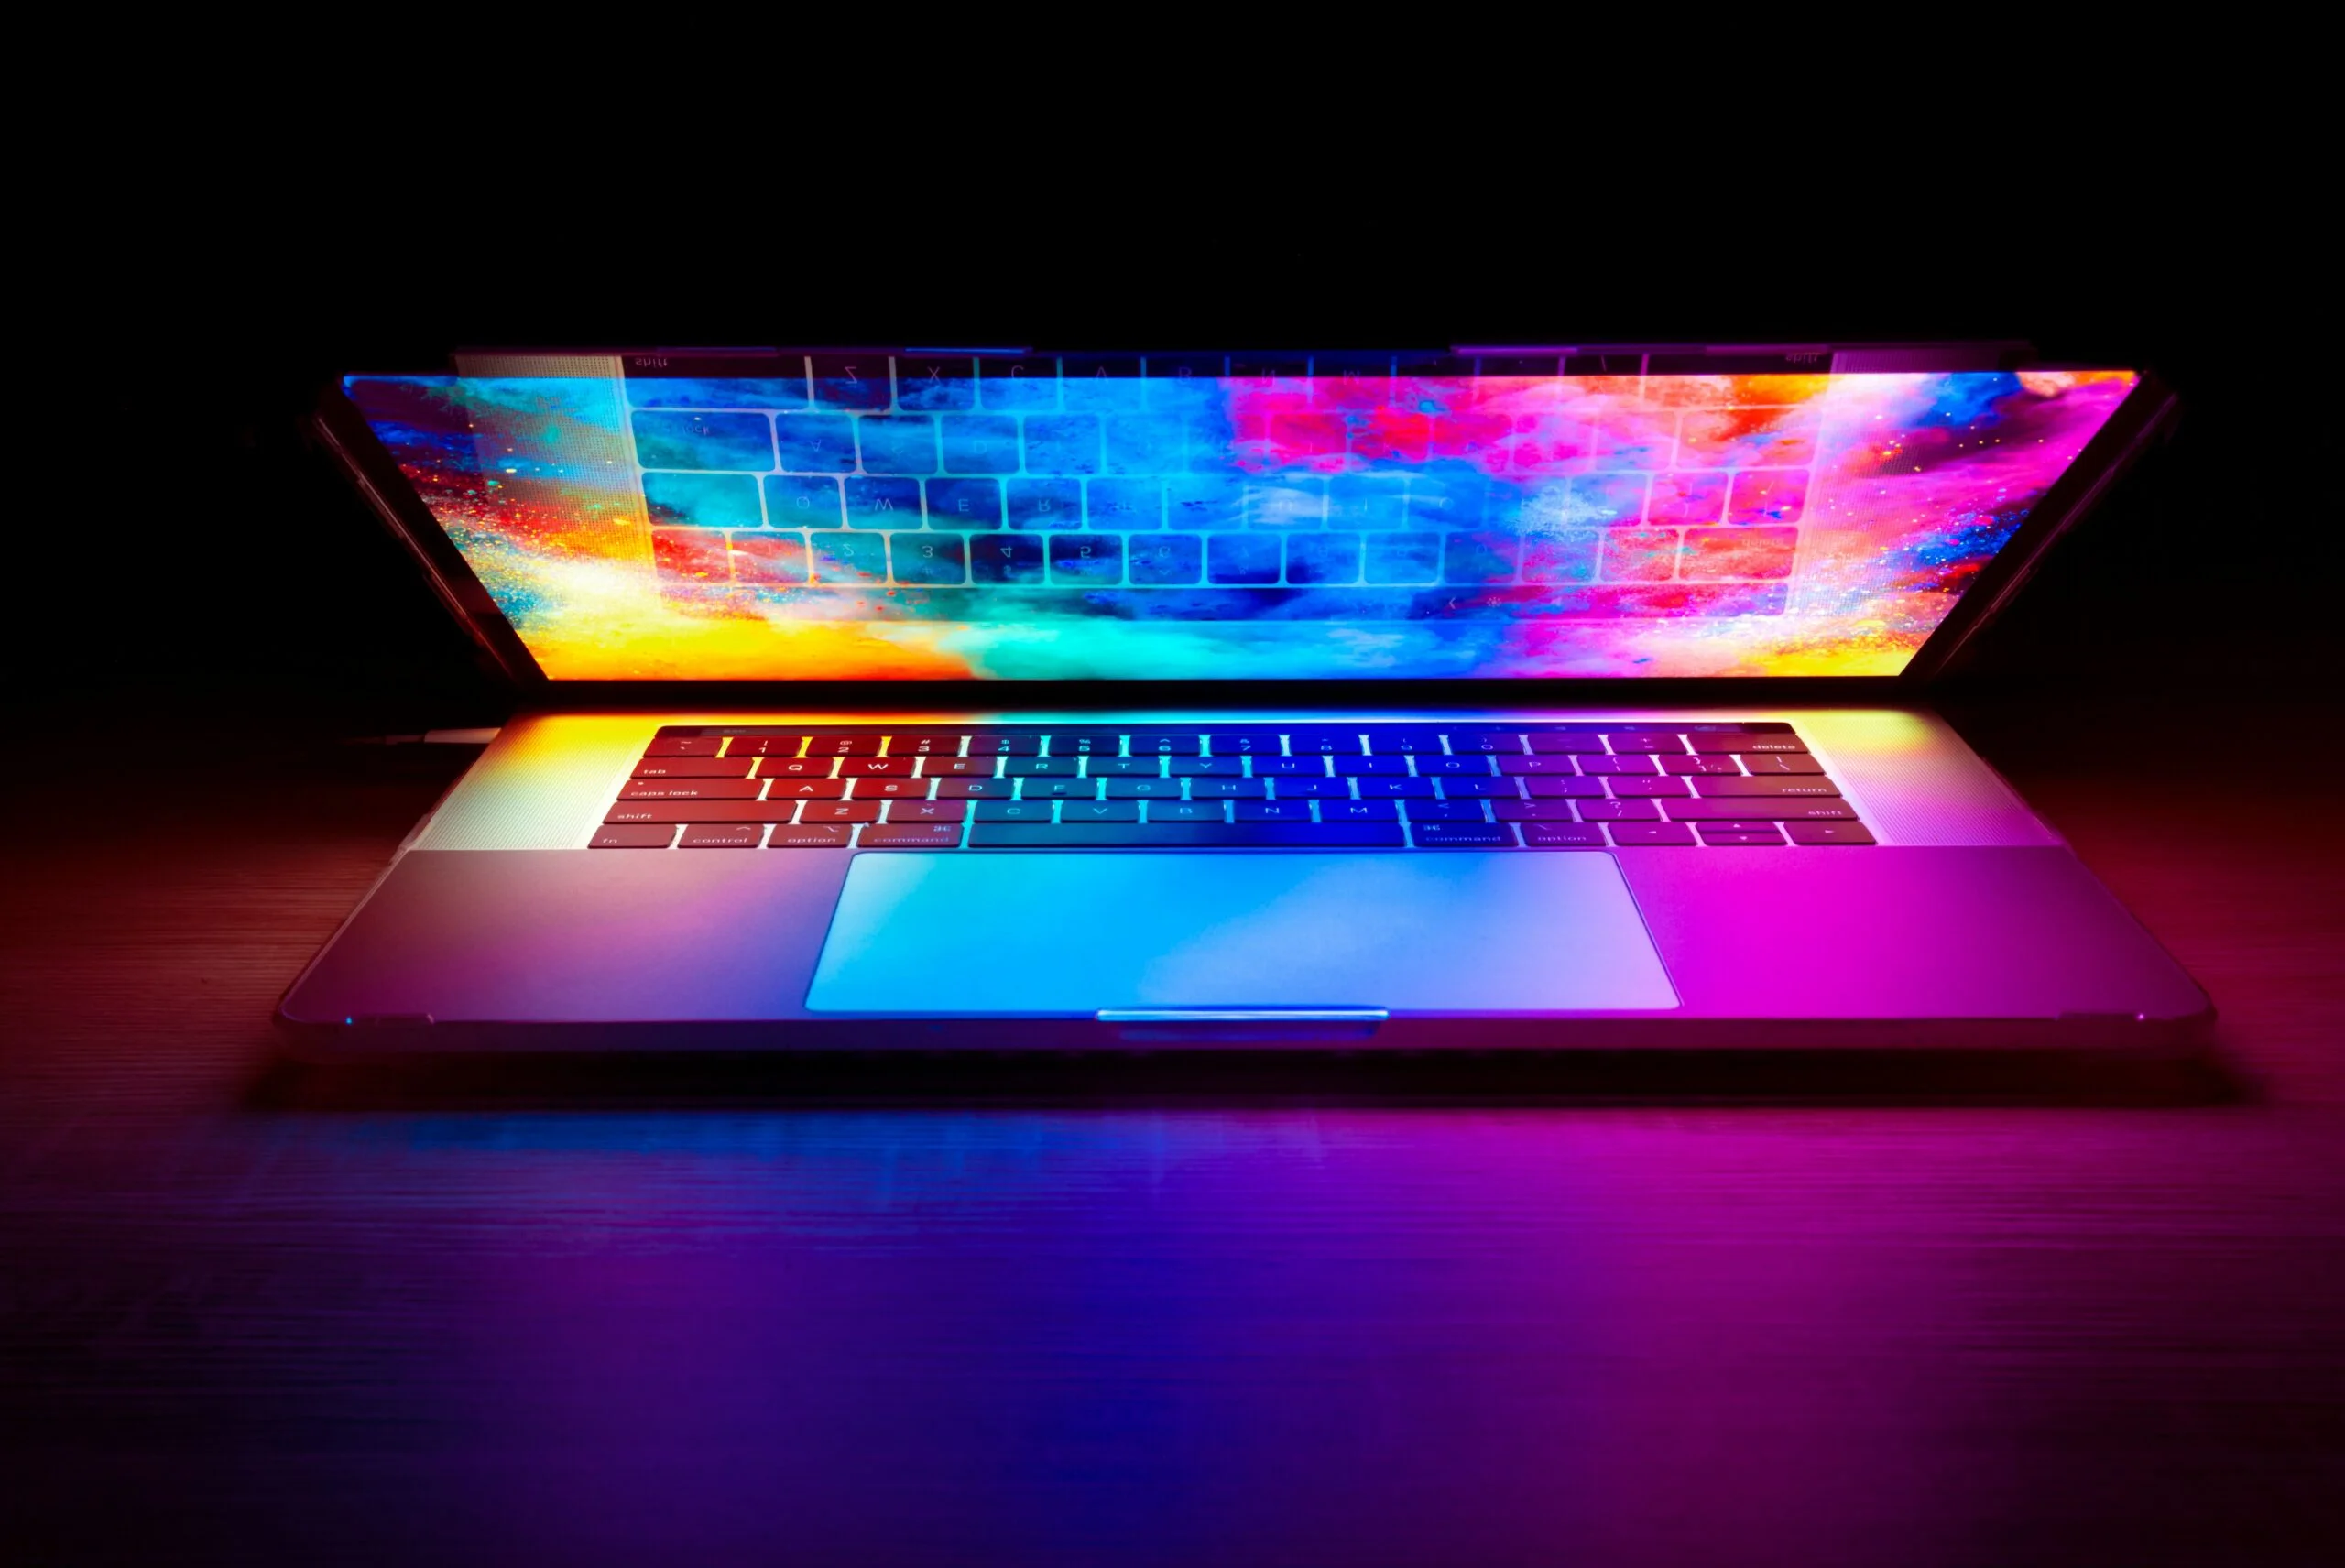 Laptop with a colorful and vibrant screen in a dark room